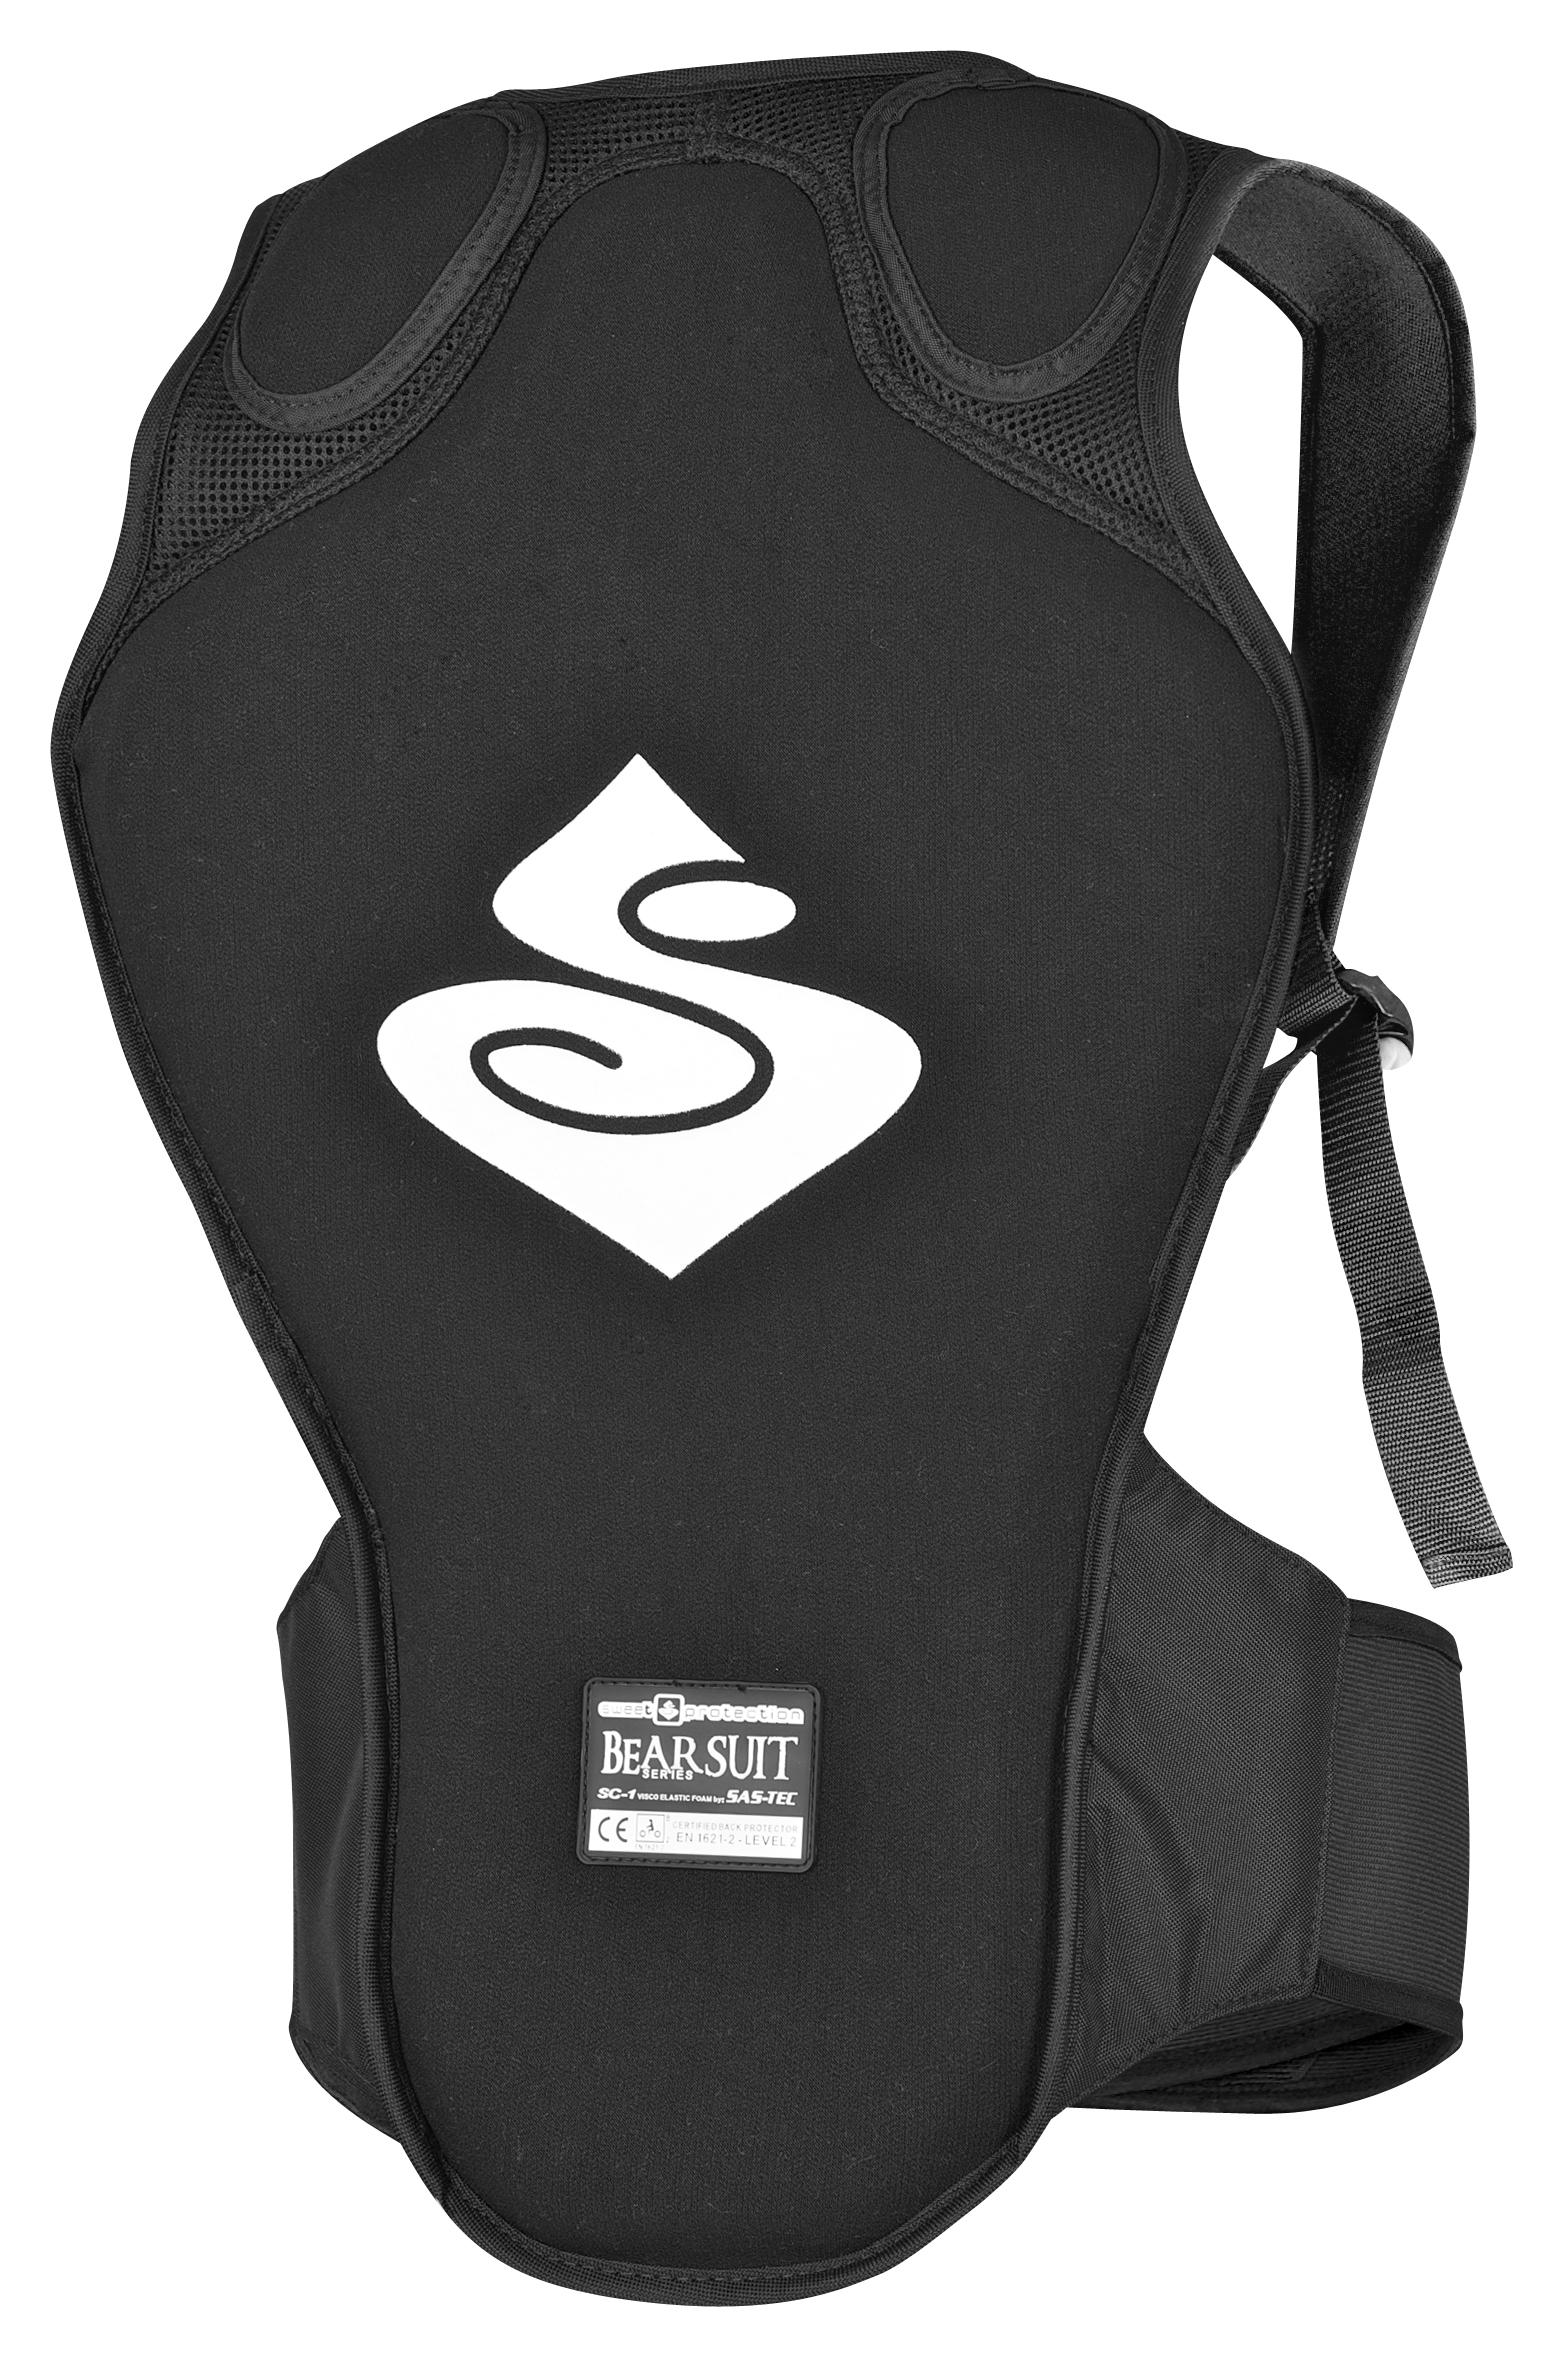 Foto Sweet Protection Bearsuit Back Protector Protectores black negro, m/l foto 168276